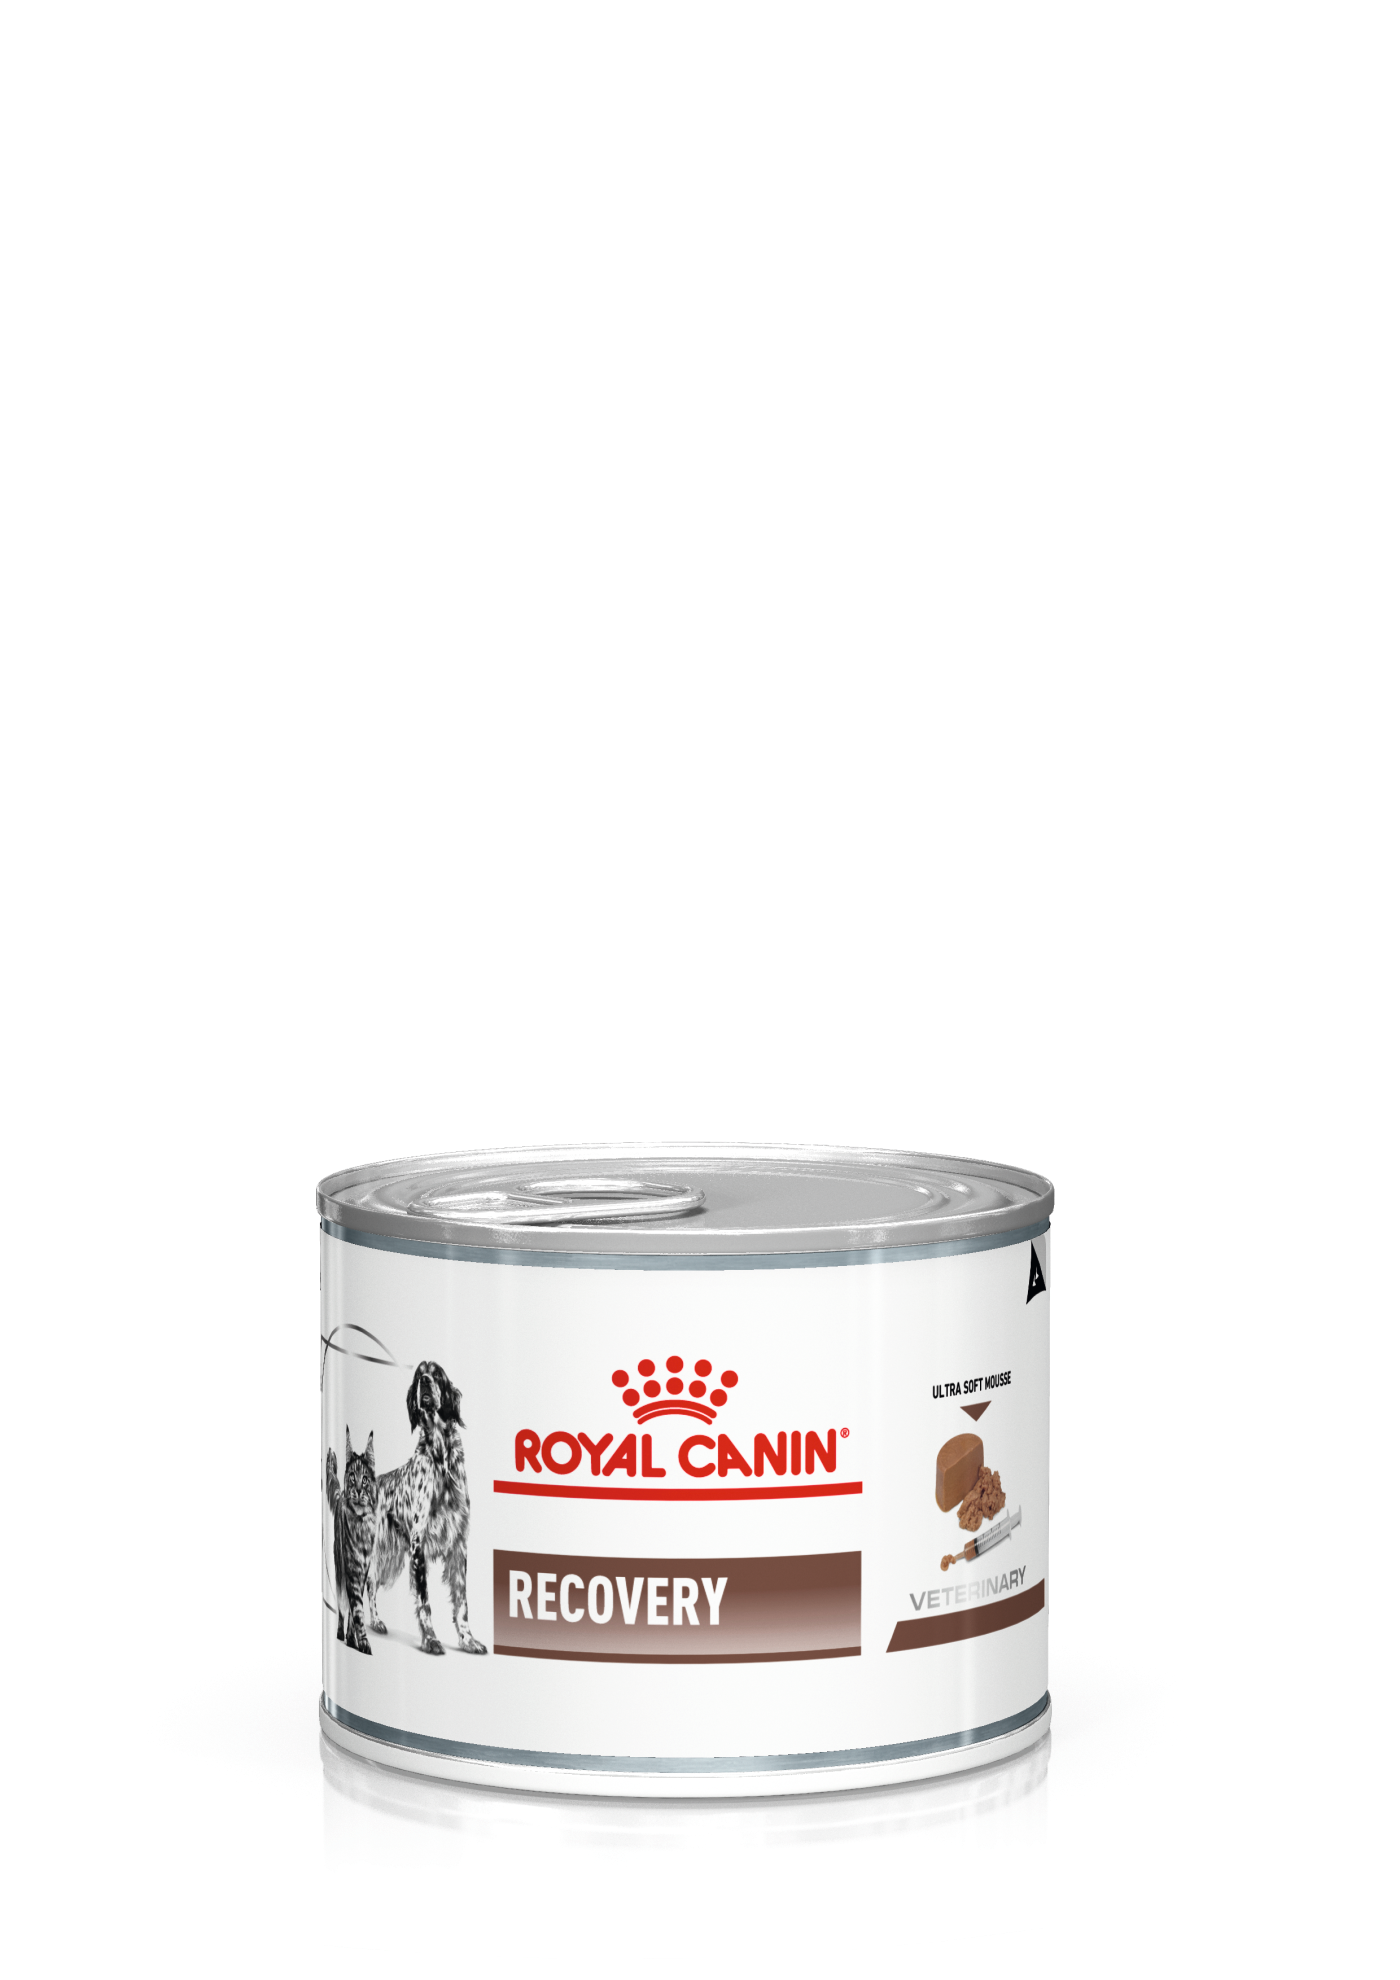 royal canin mousse